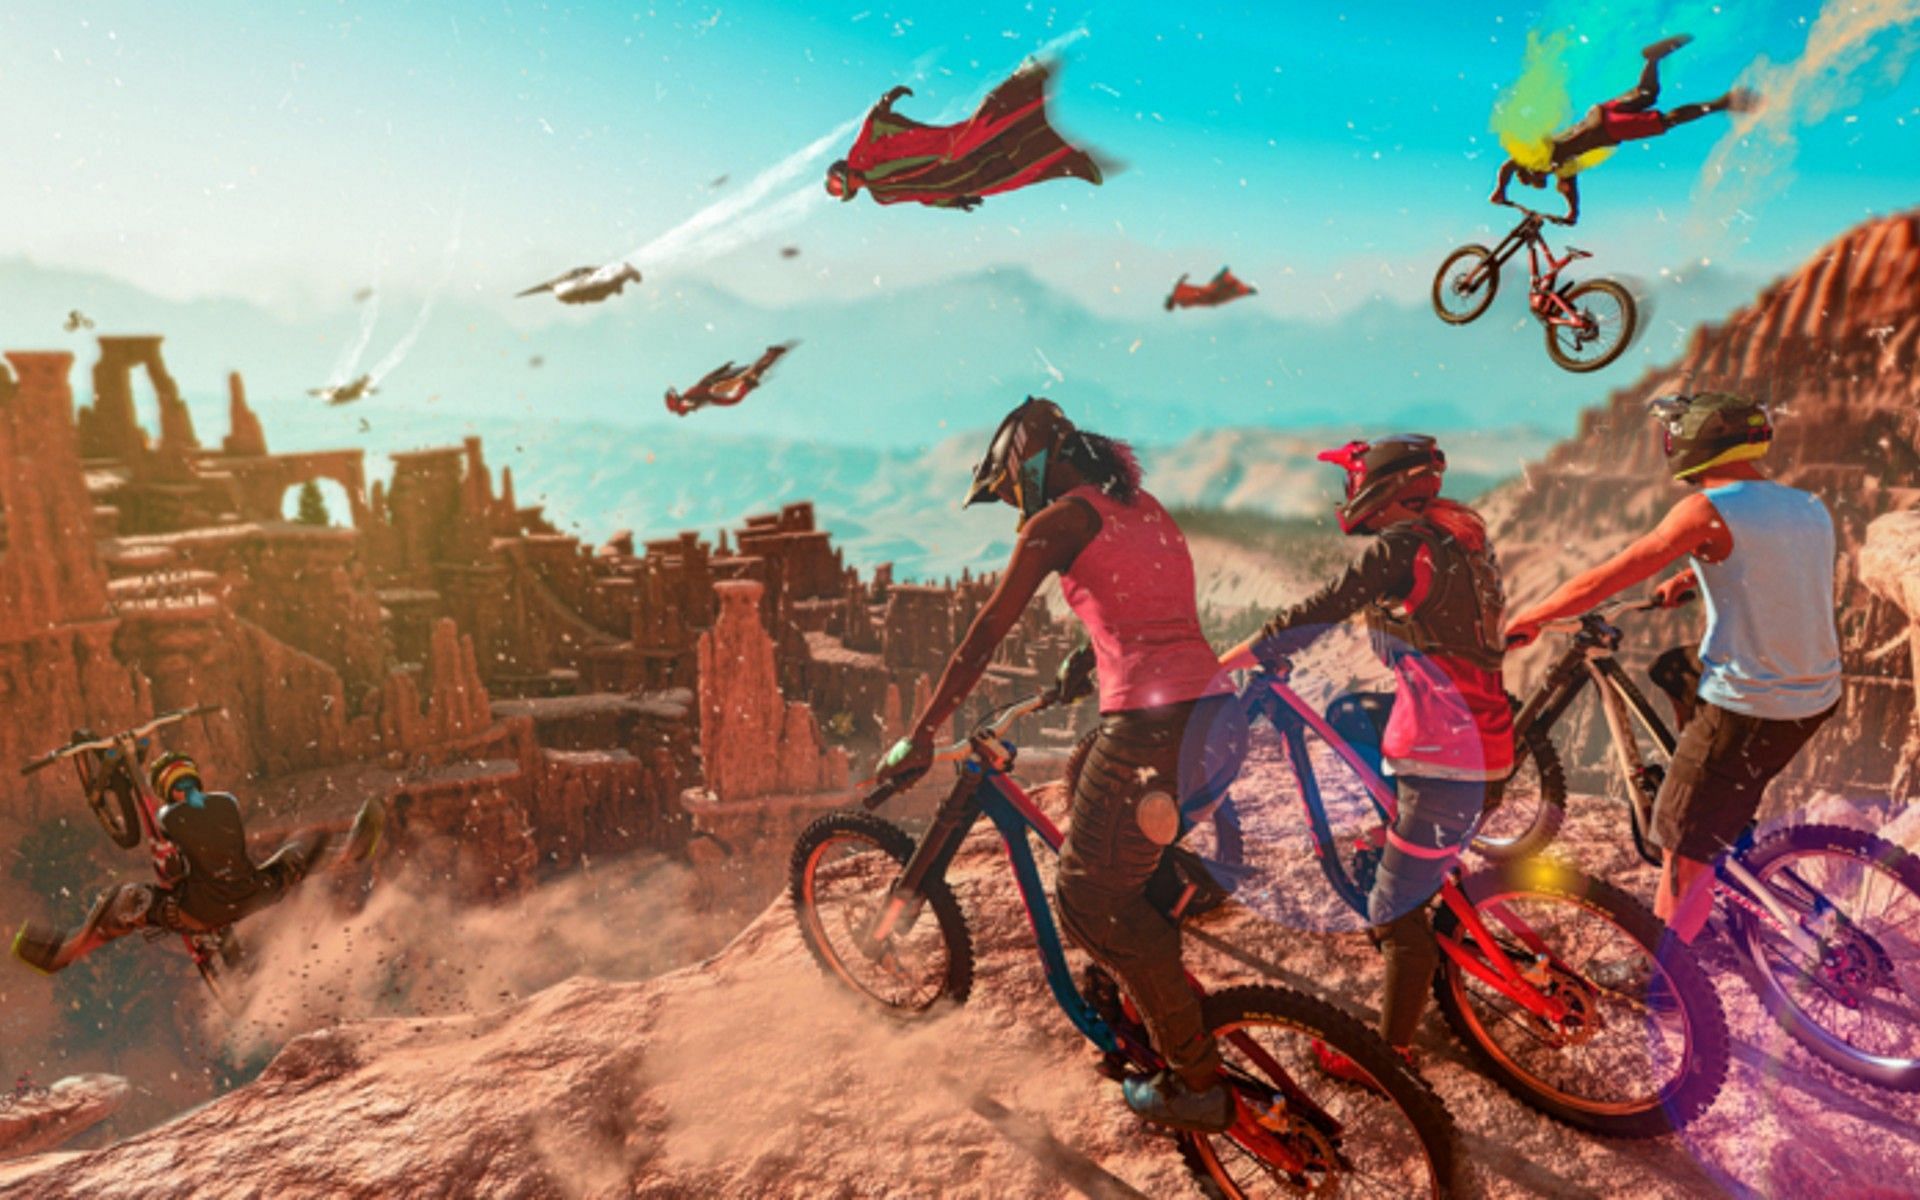 Up to five players can join a group in Riders Republic. (Image via Ubisoft)